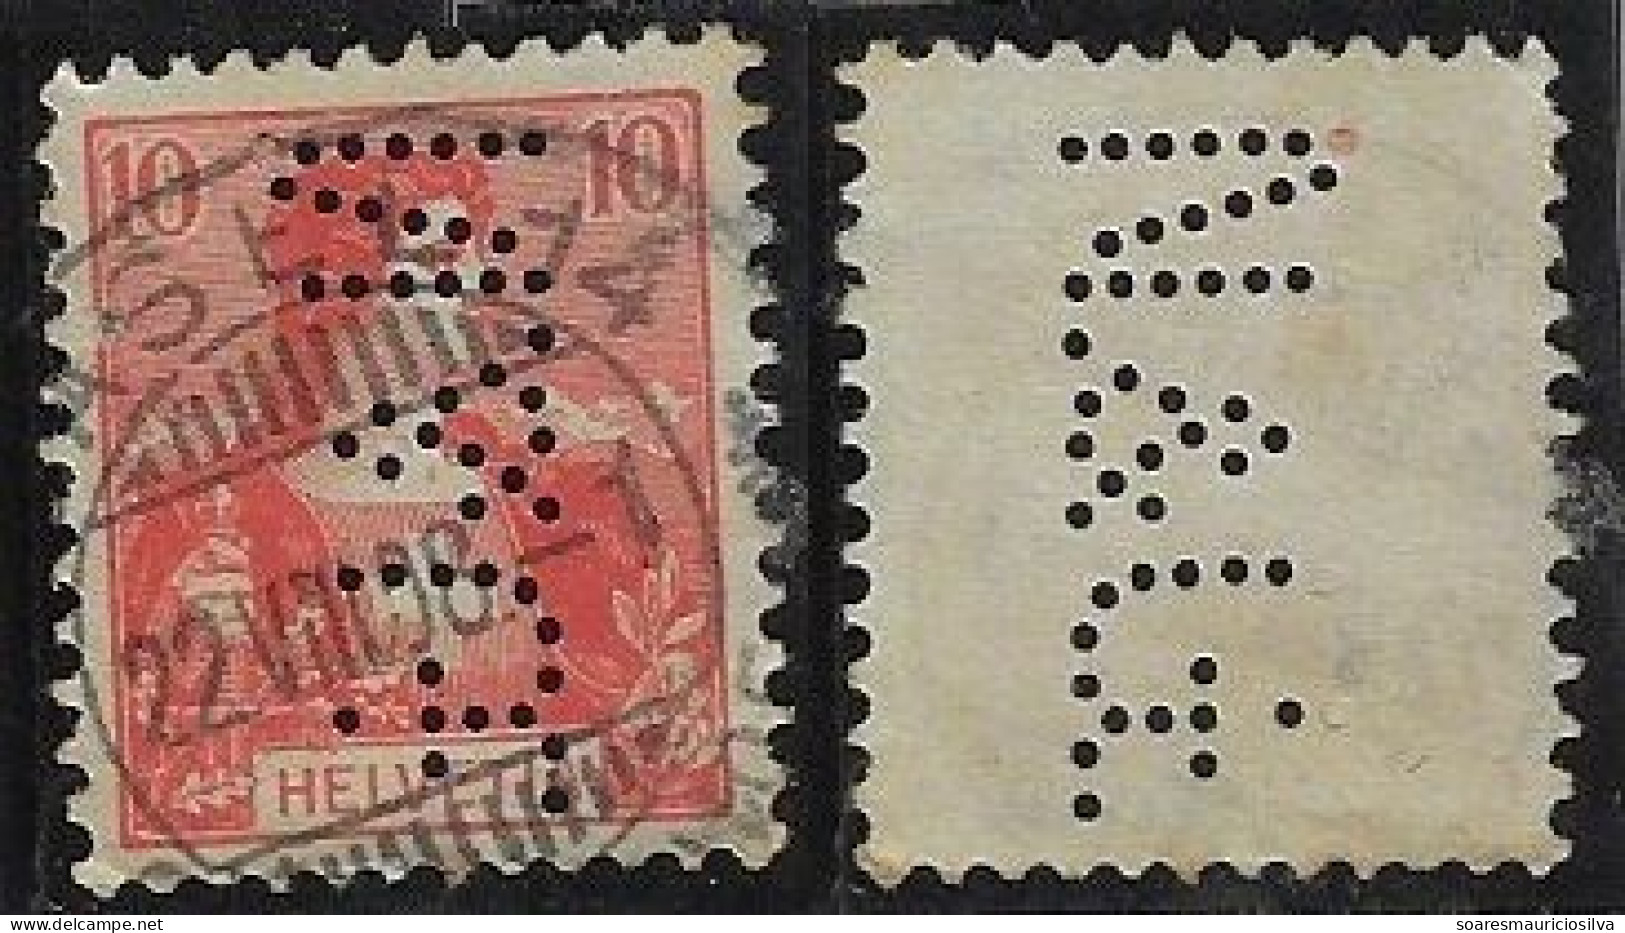 Switzerland 1905/1919 Stamp With Perfin N.&G. By Niebergall & Goth International Transport From Basel Lochung Perfore - Perfin